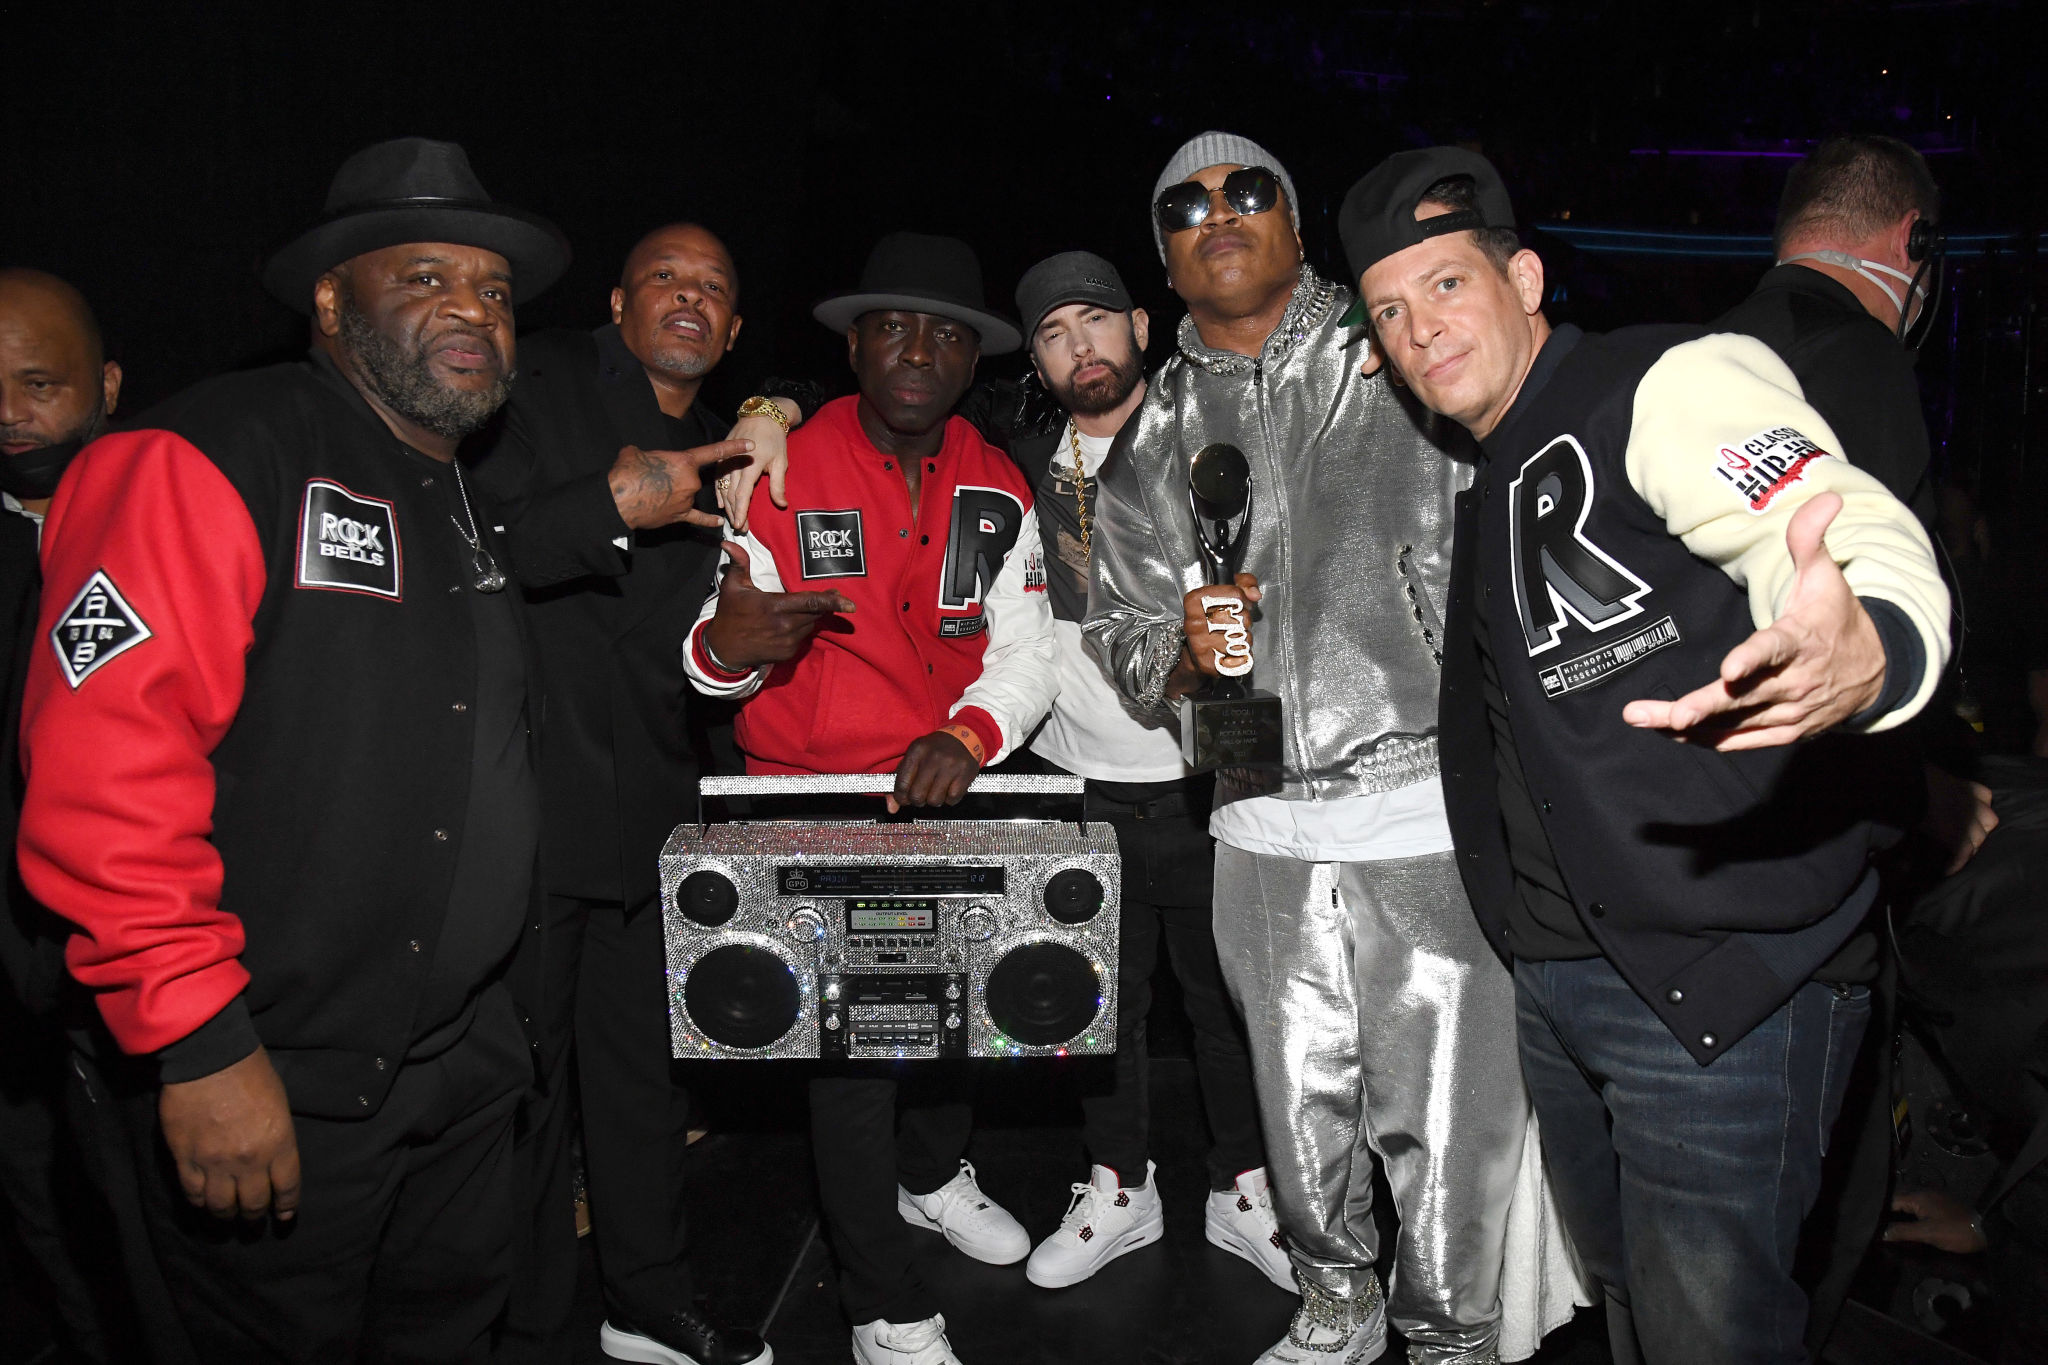 CLEVELAND, OHIO - OCTOBER 30: Cut Creator, Dr. Dre, E-Love, Eminem, LL Cool J and DJ Z-Trip pose backstage during the 36th Annual Rock & Roll Hall Of Fame Induction Ceremony at Rocket Mortgage Fieldhouse on October 30, 2021 in Cleveland, Ohio. (Photo by Kevin Mazur/Getty Images for The Rock and Roll Hall of Fame )